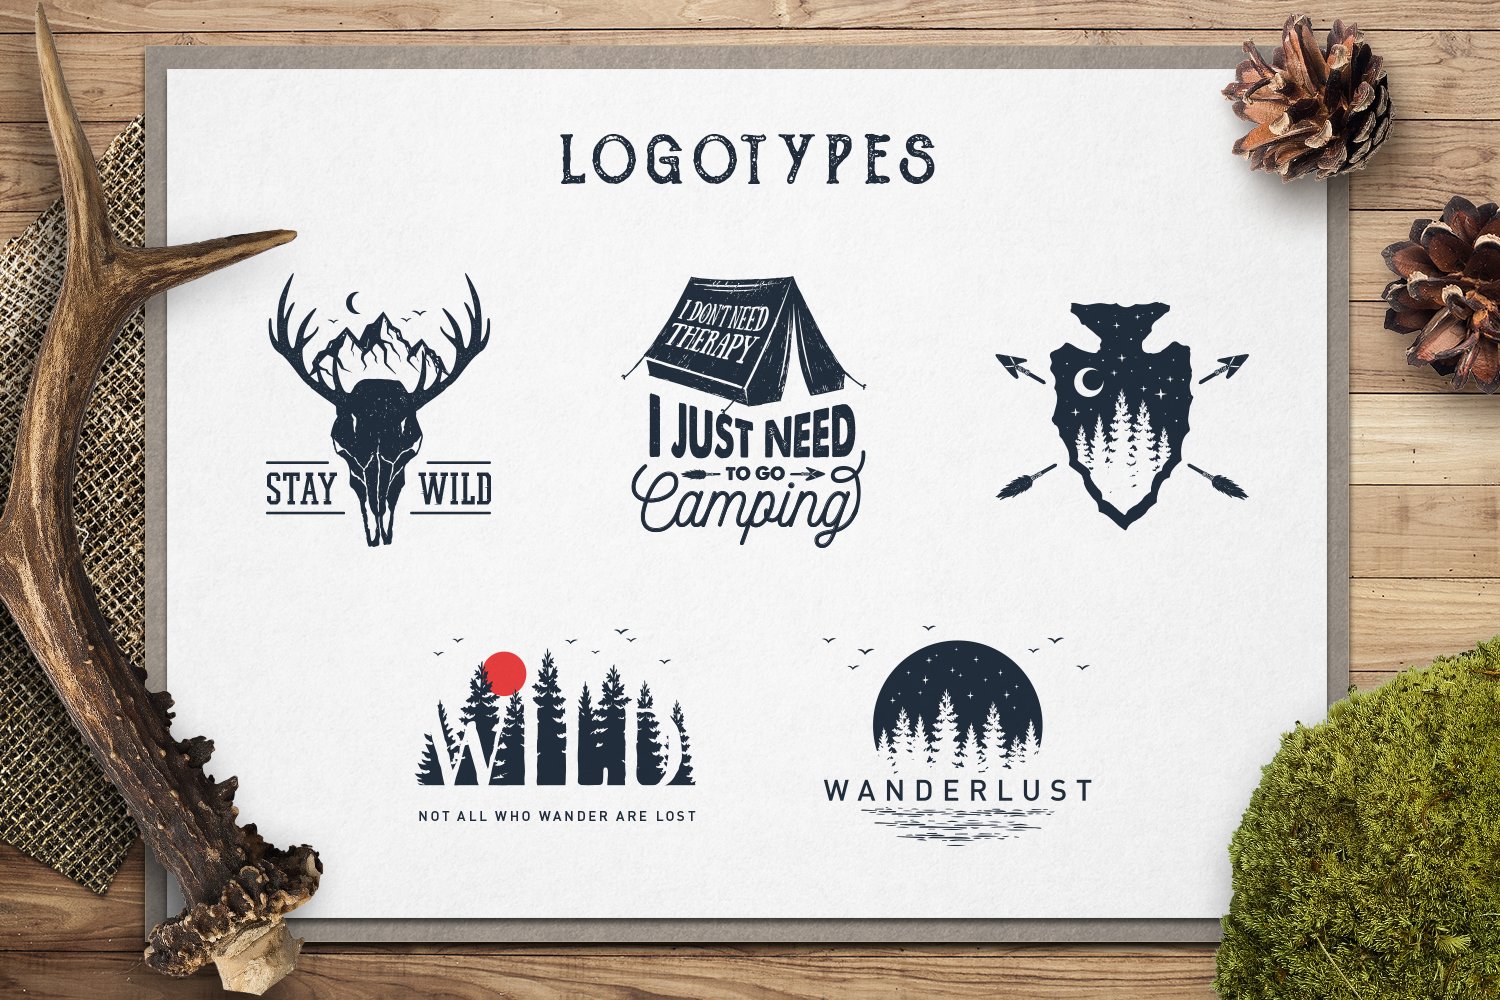 Diverse of logotypes for adventures.